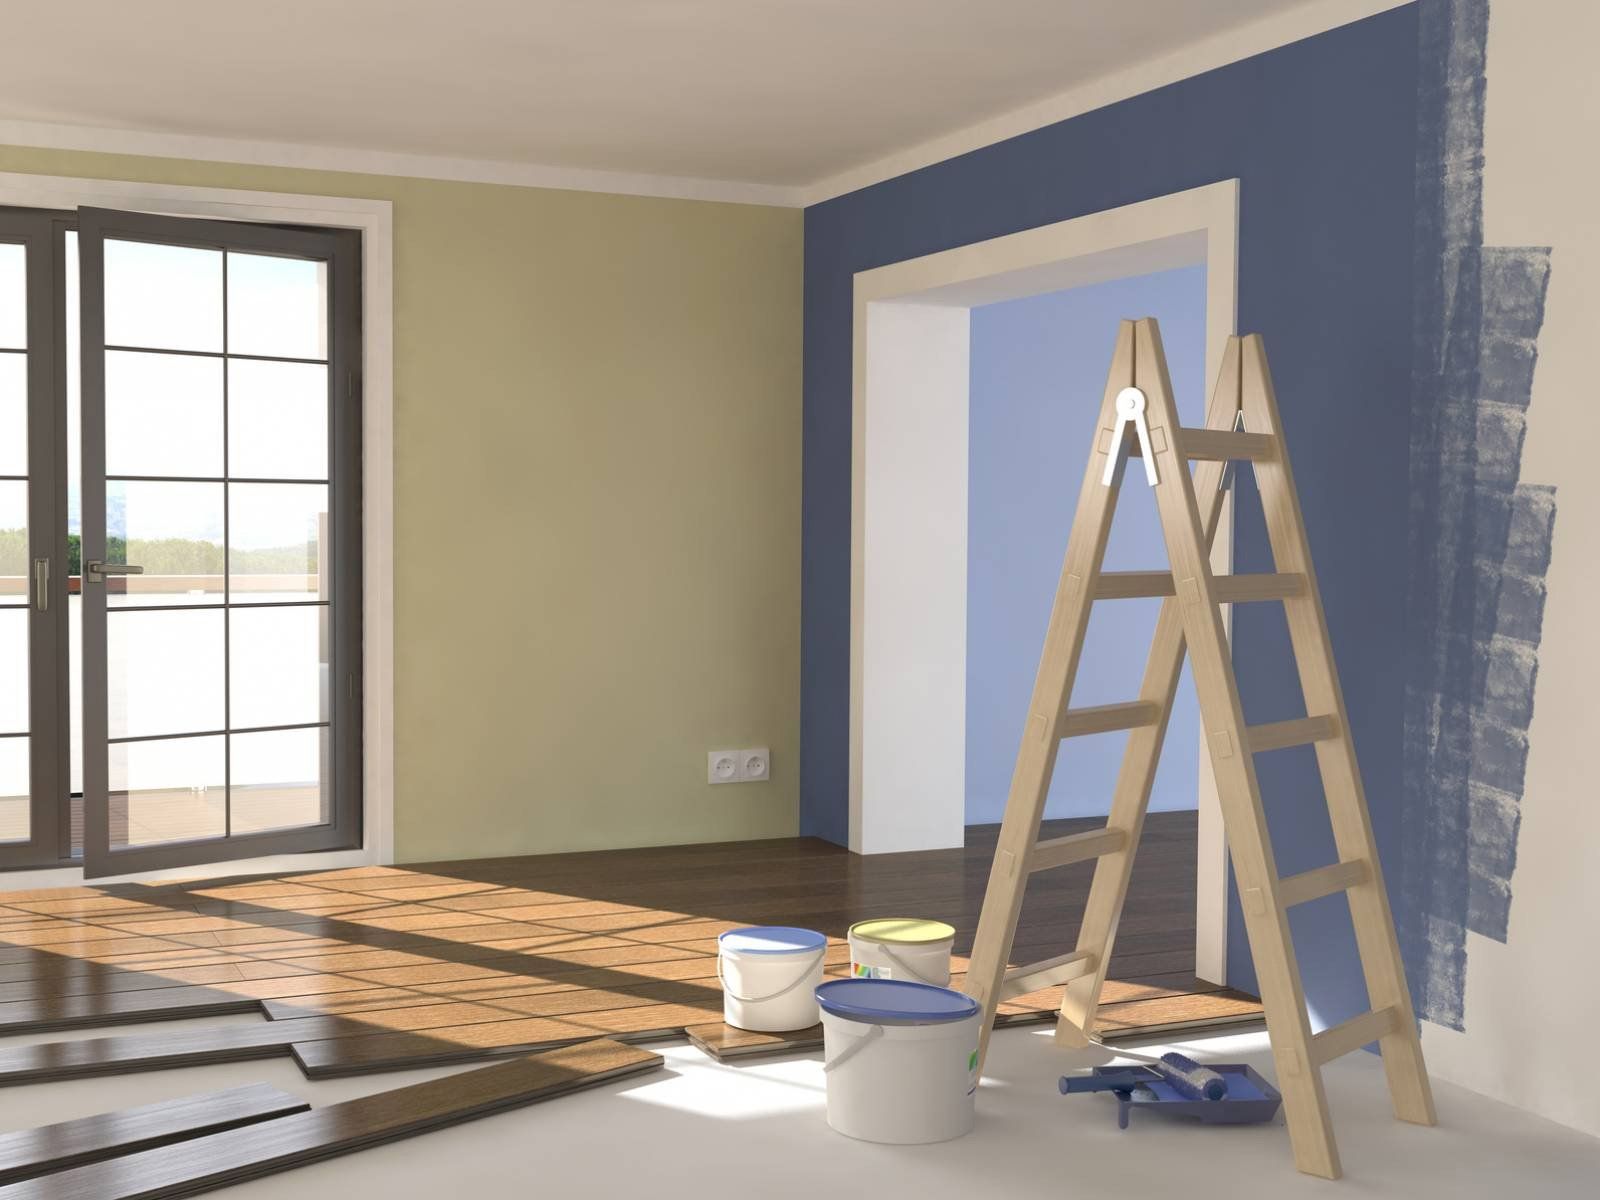 Common Mistakes People Make When Painting Inside Their Home